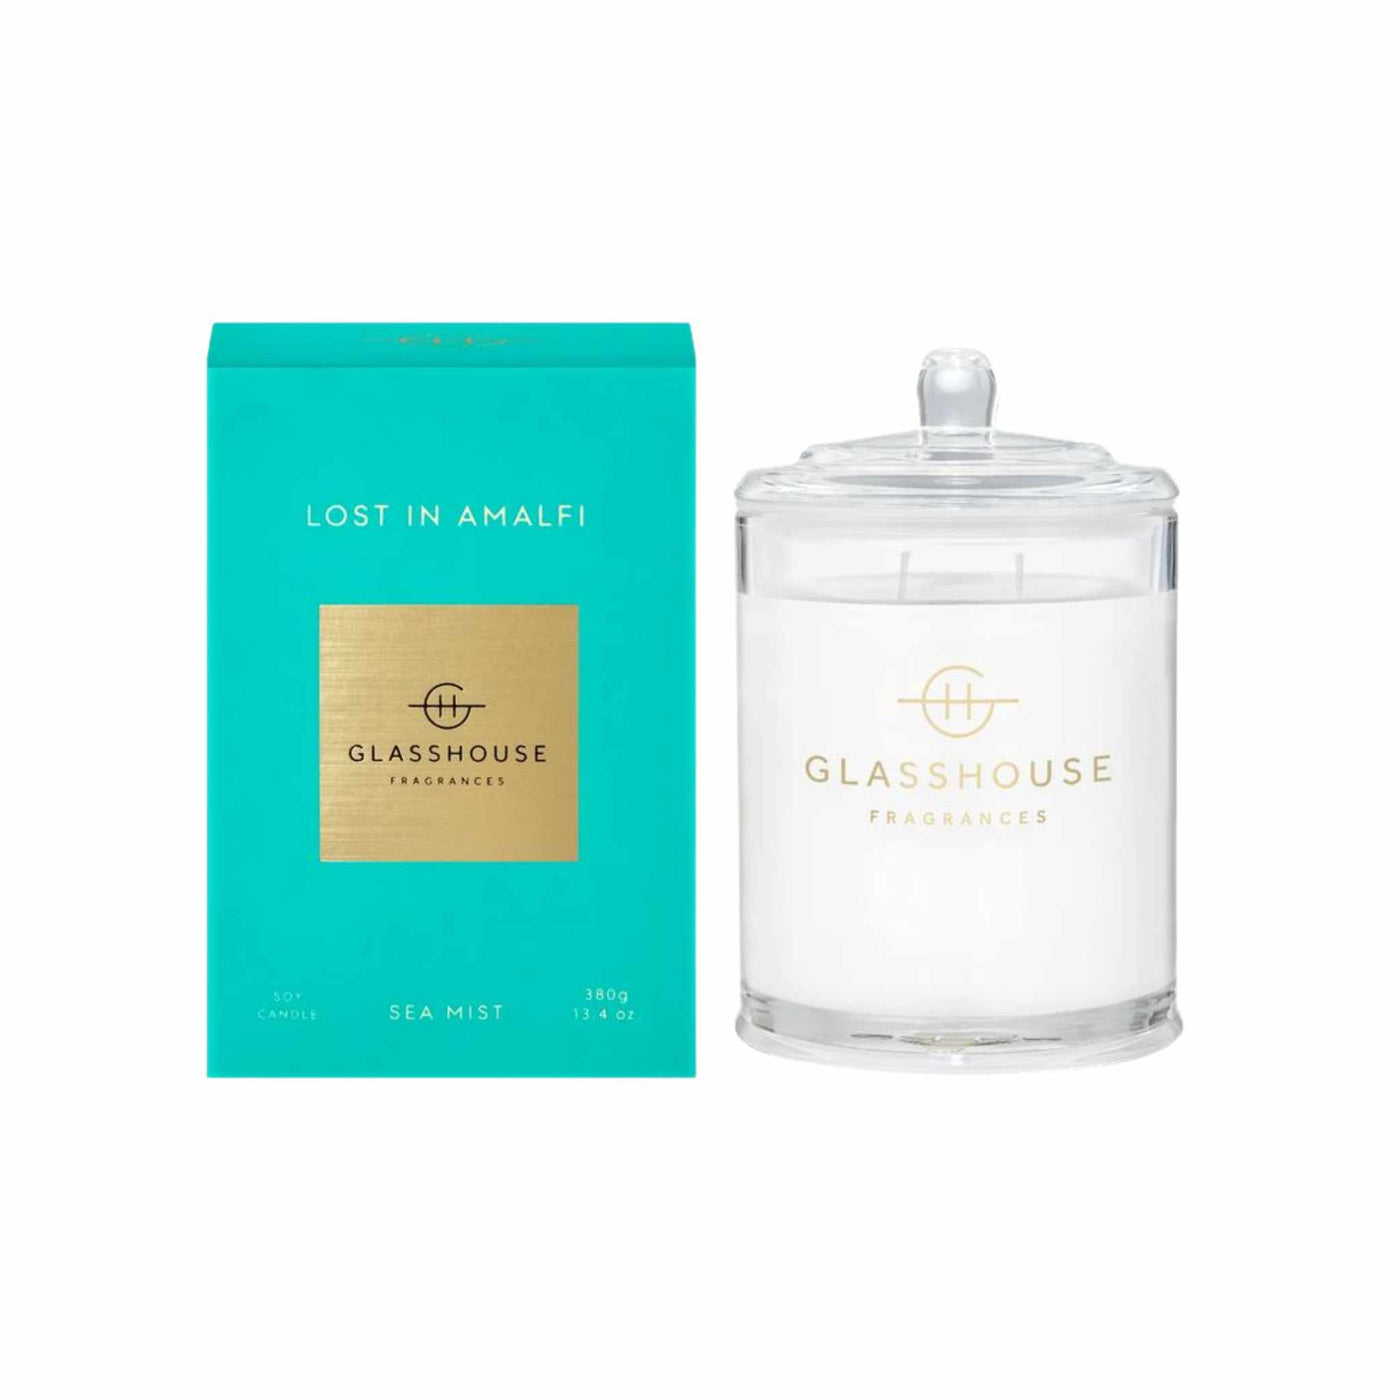 Glasshouse Fragrances Lost in Amalfi Candle 380g